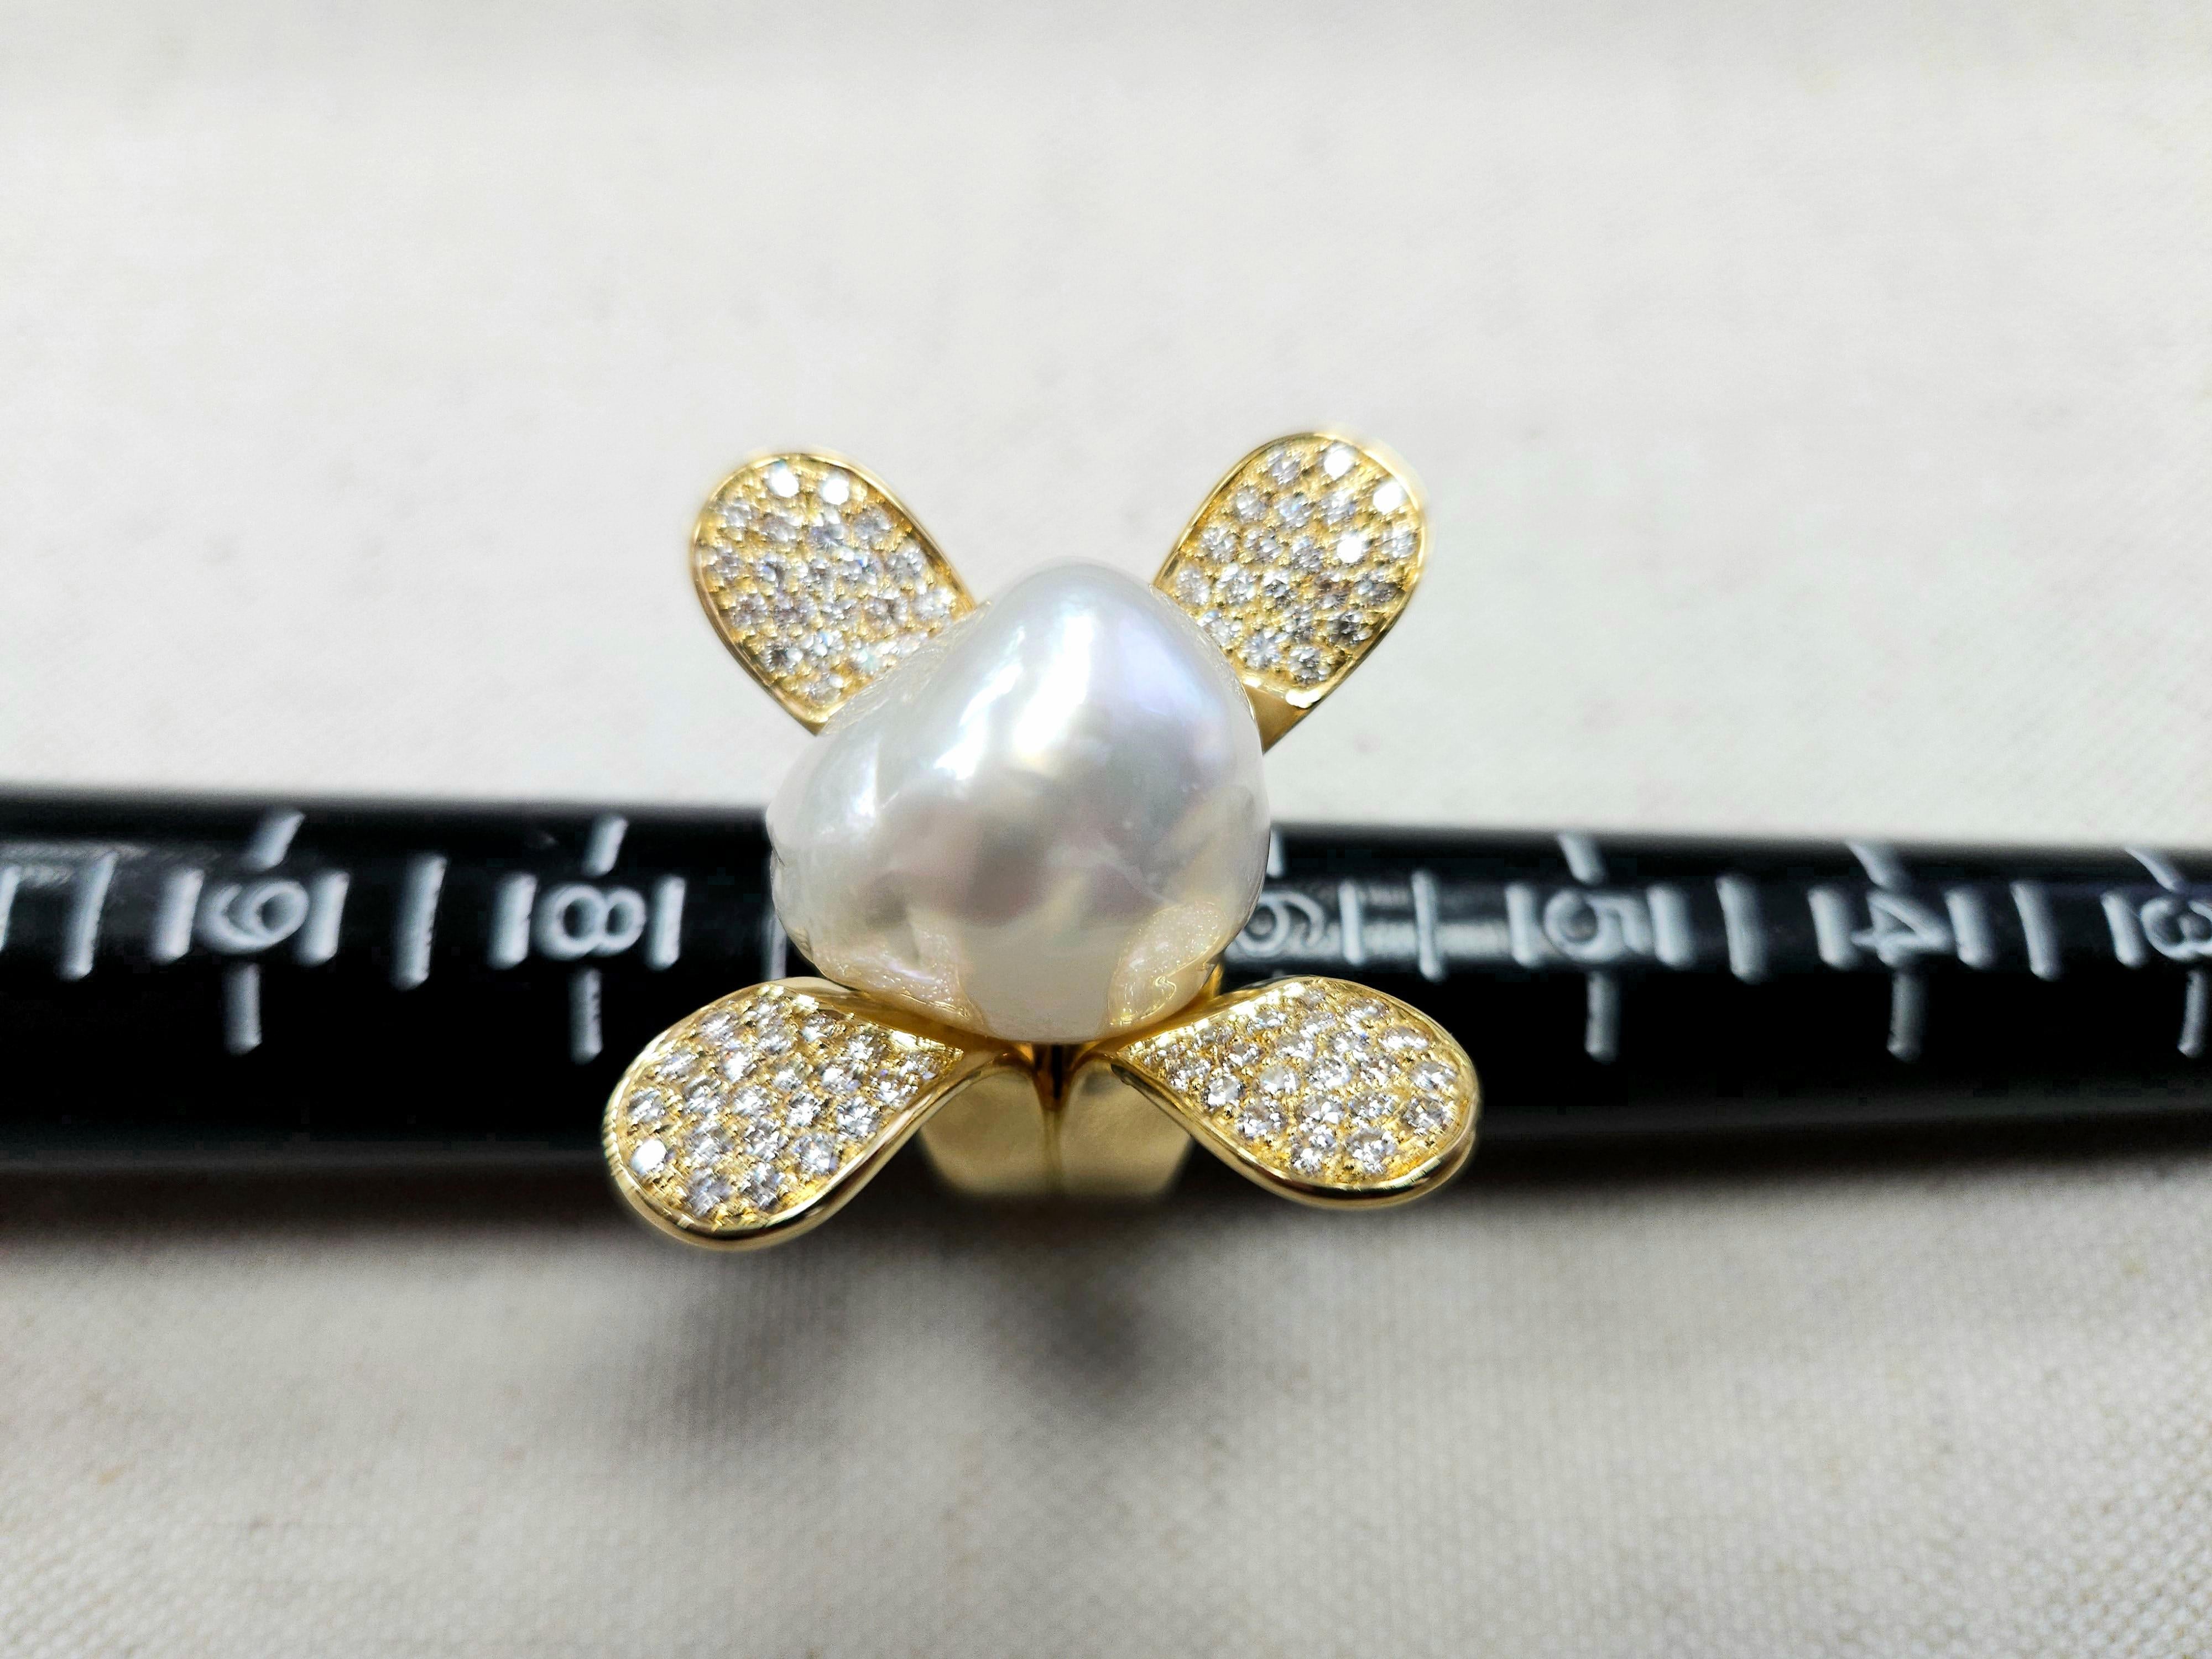 Designer Hand made 18K Gold ring diamond Seris, This is the unique Yellow Gold Natural South Sea Pearl with Open Flower Ring 18K 7 Inch , Average F-VS, 31.36 Grams, 3.00cts Diamond

*Free Shipping within U.S*

